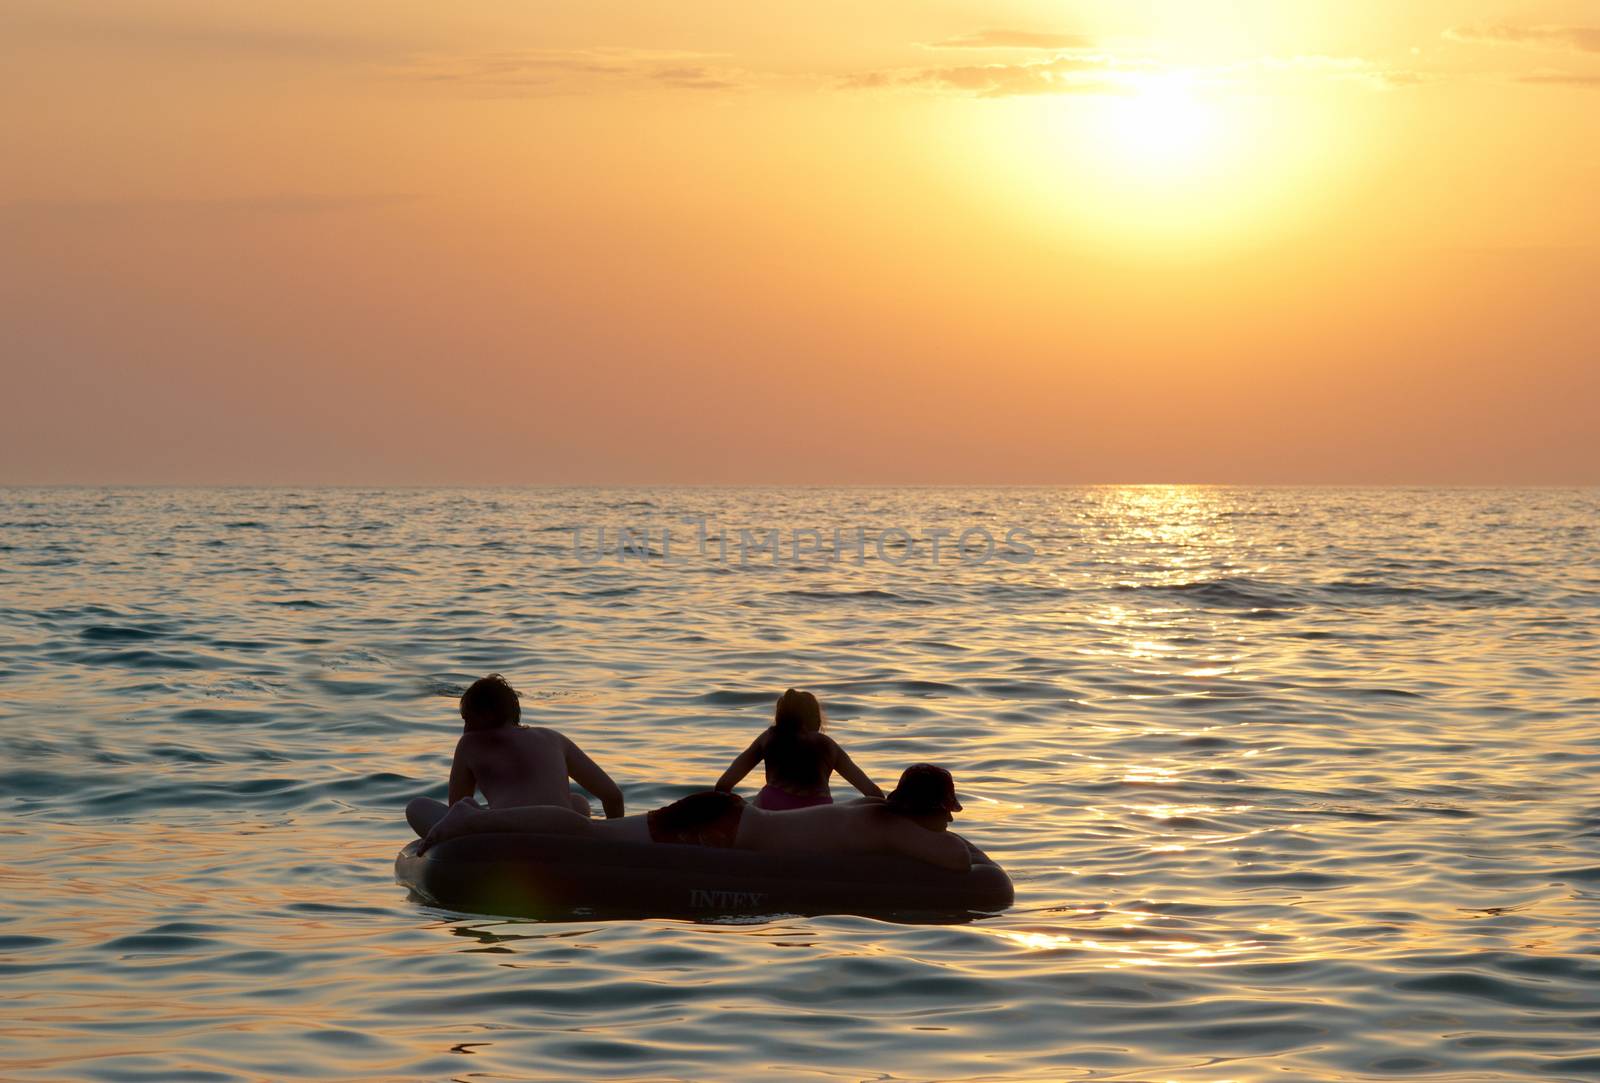 People on the raft with sea's sunset